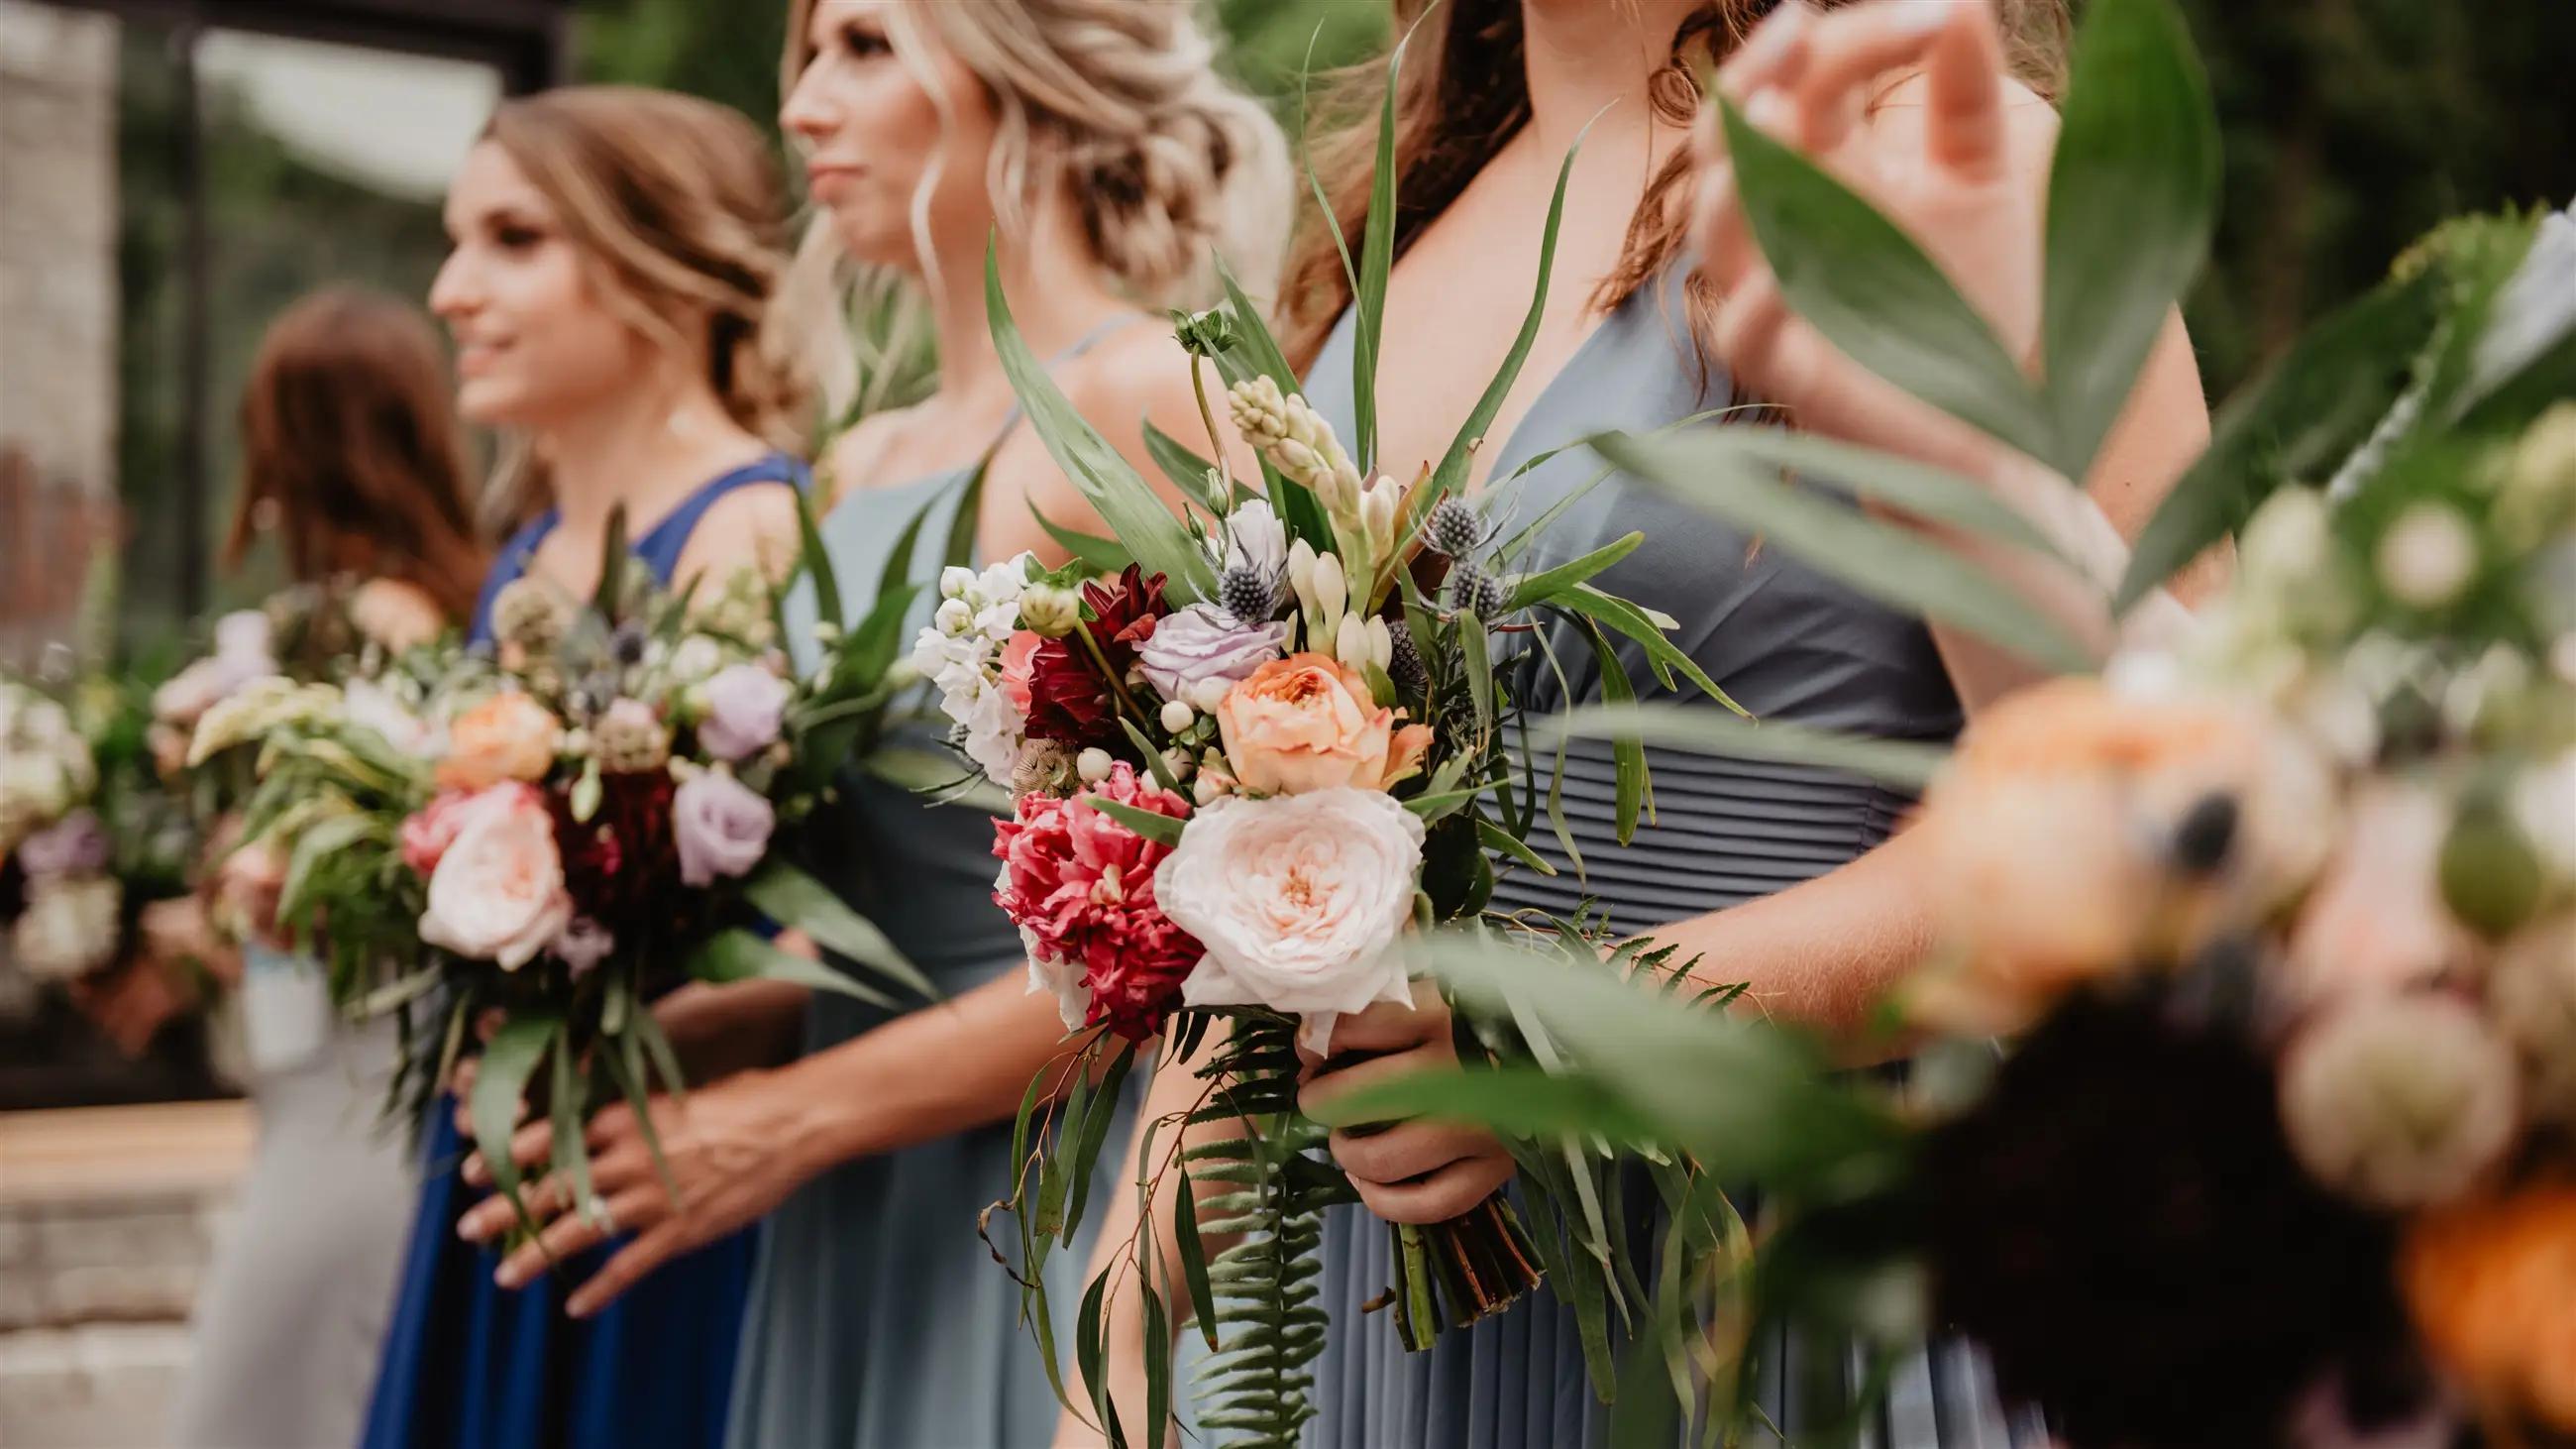 The Bride is Panicking: How to Be a Supportive Bridesmaid During COVID-19 Mobile Image